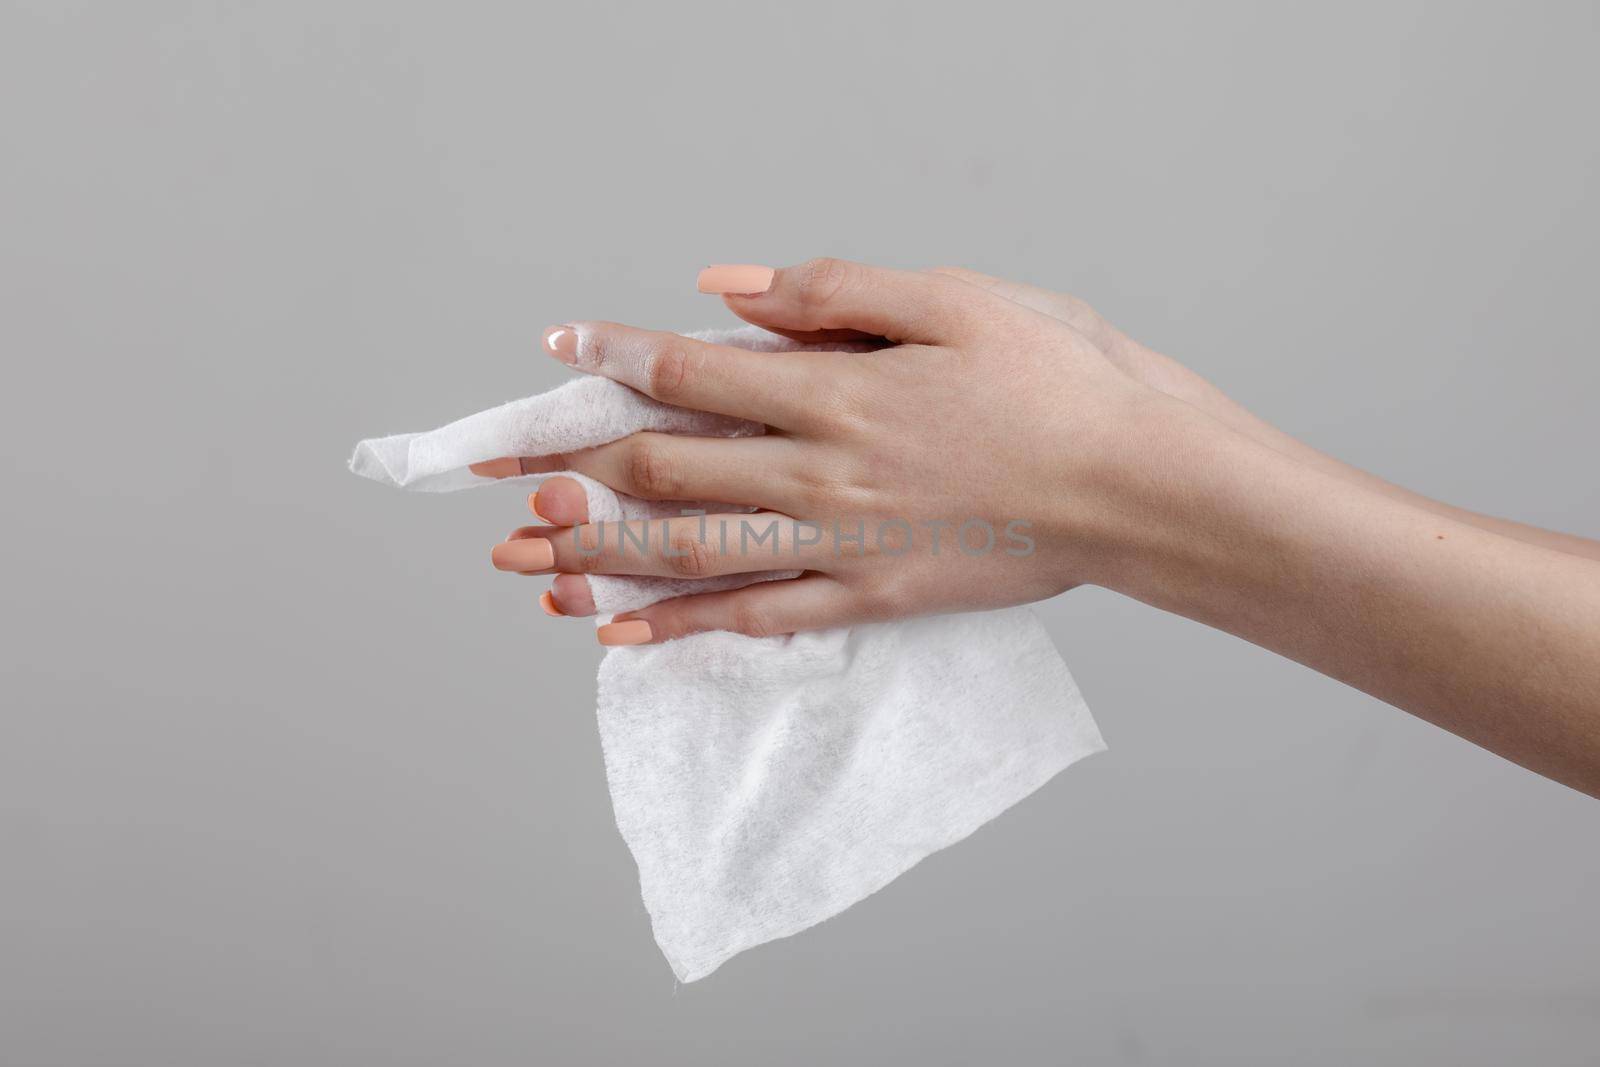 prevention of infectious diseases, corona19, Cleaning hands with wet wipes